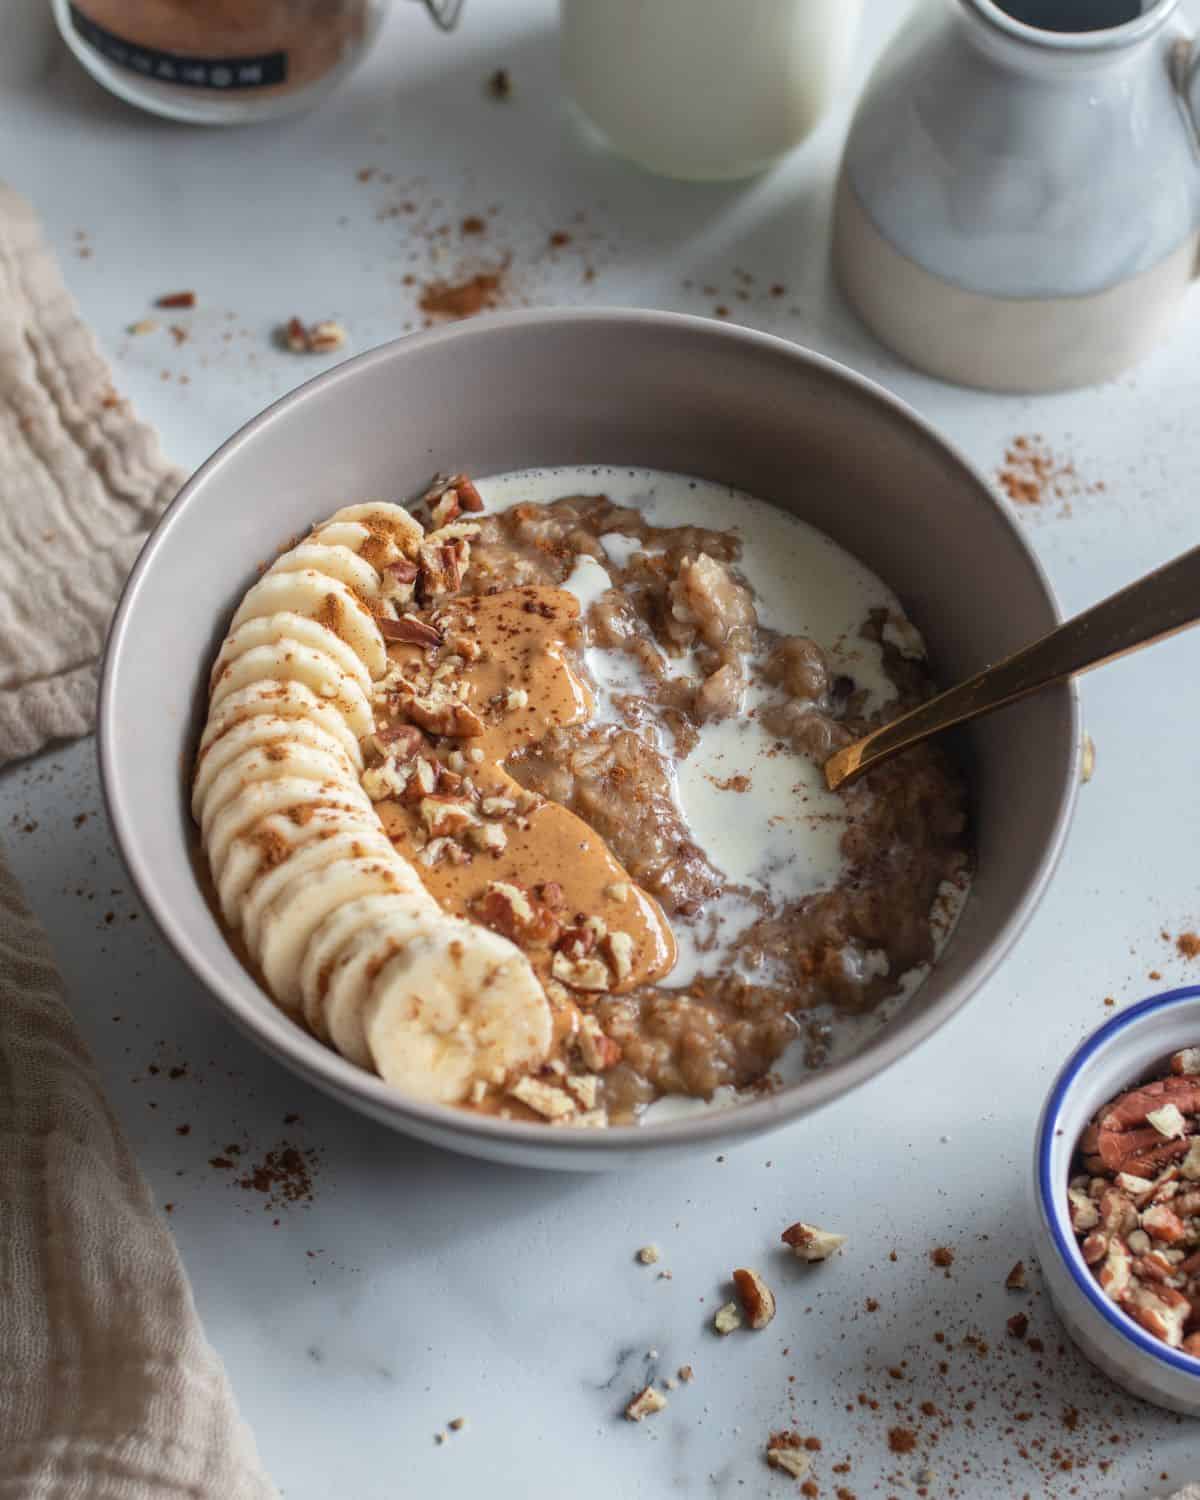 Bowl of date oatmeal with banana, pecan and cream topping.